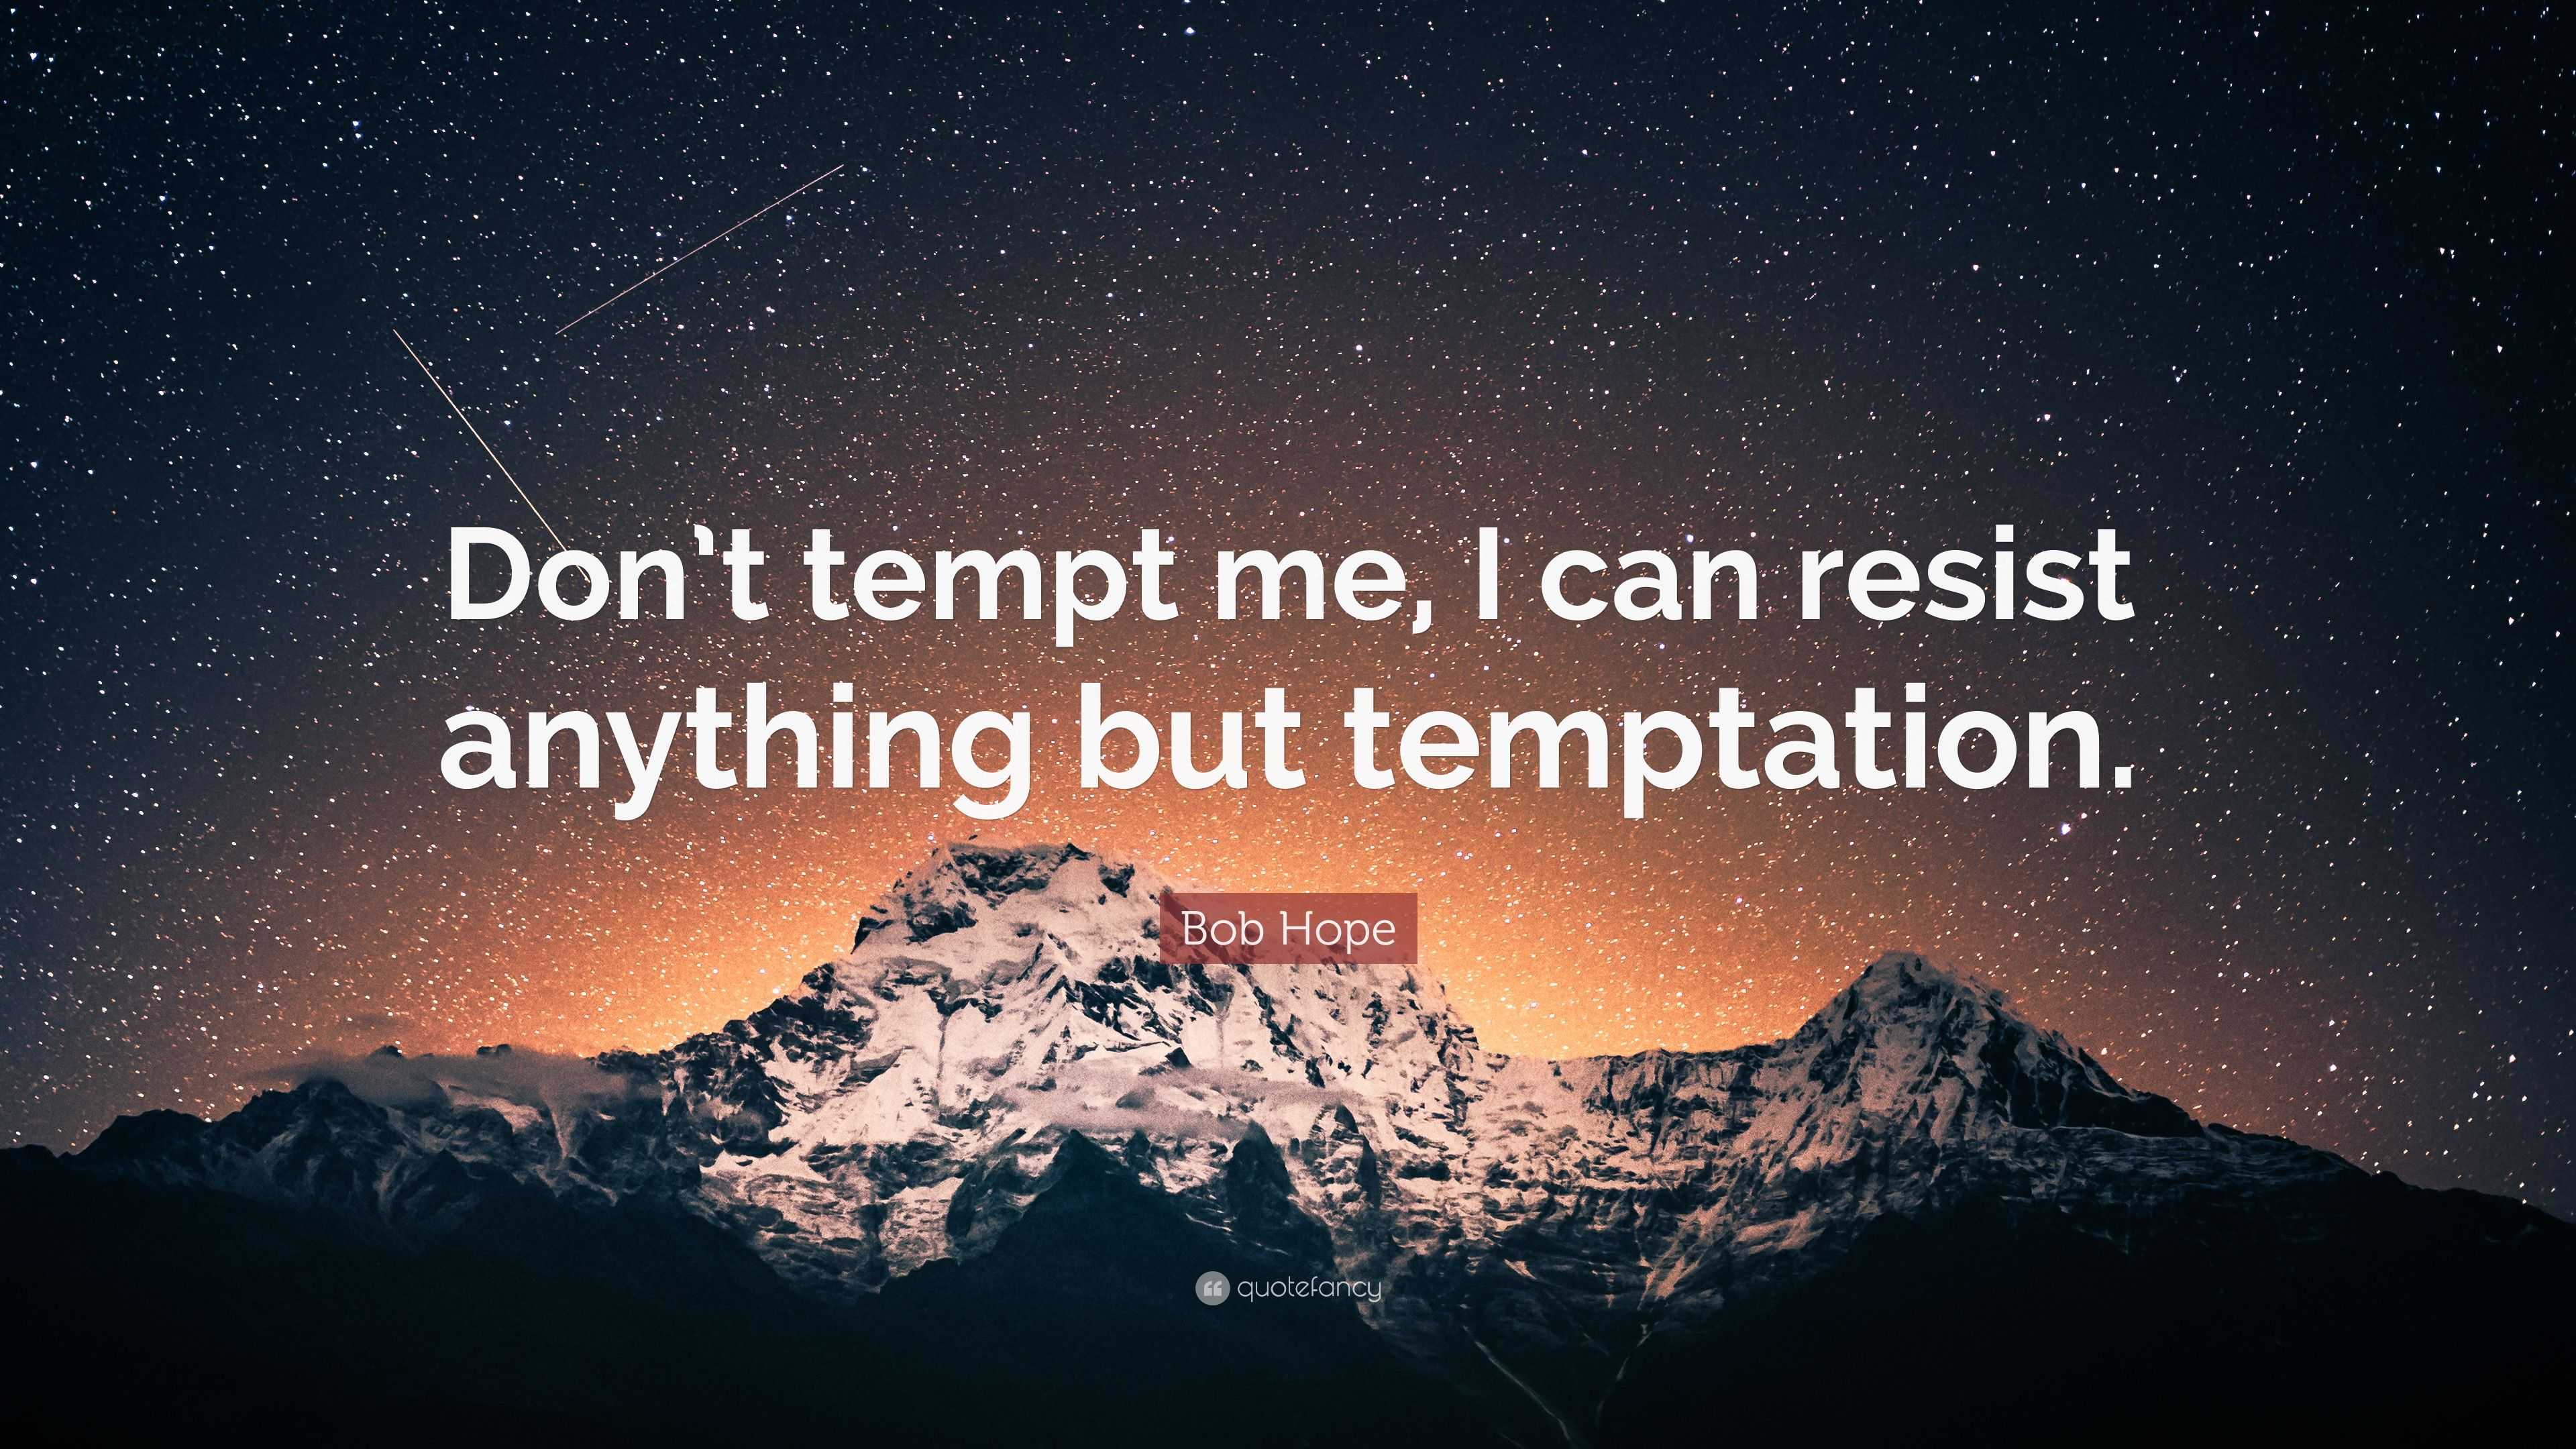 Bob Hope Quote: “Don't tempt me, I can resist anything but temptation.”